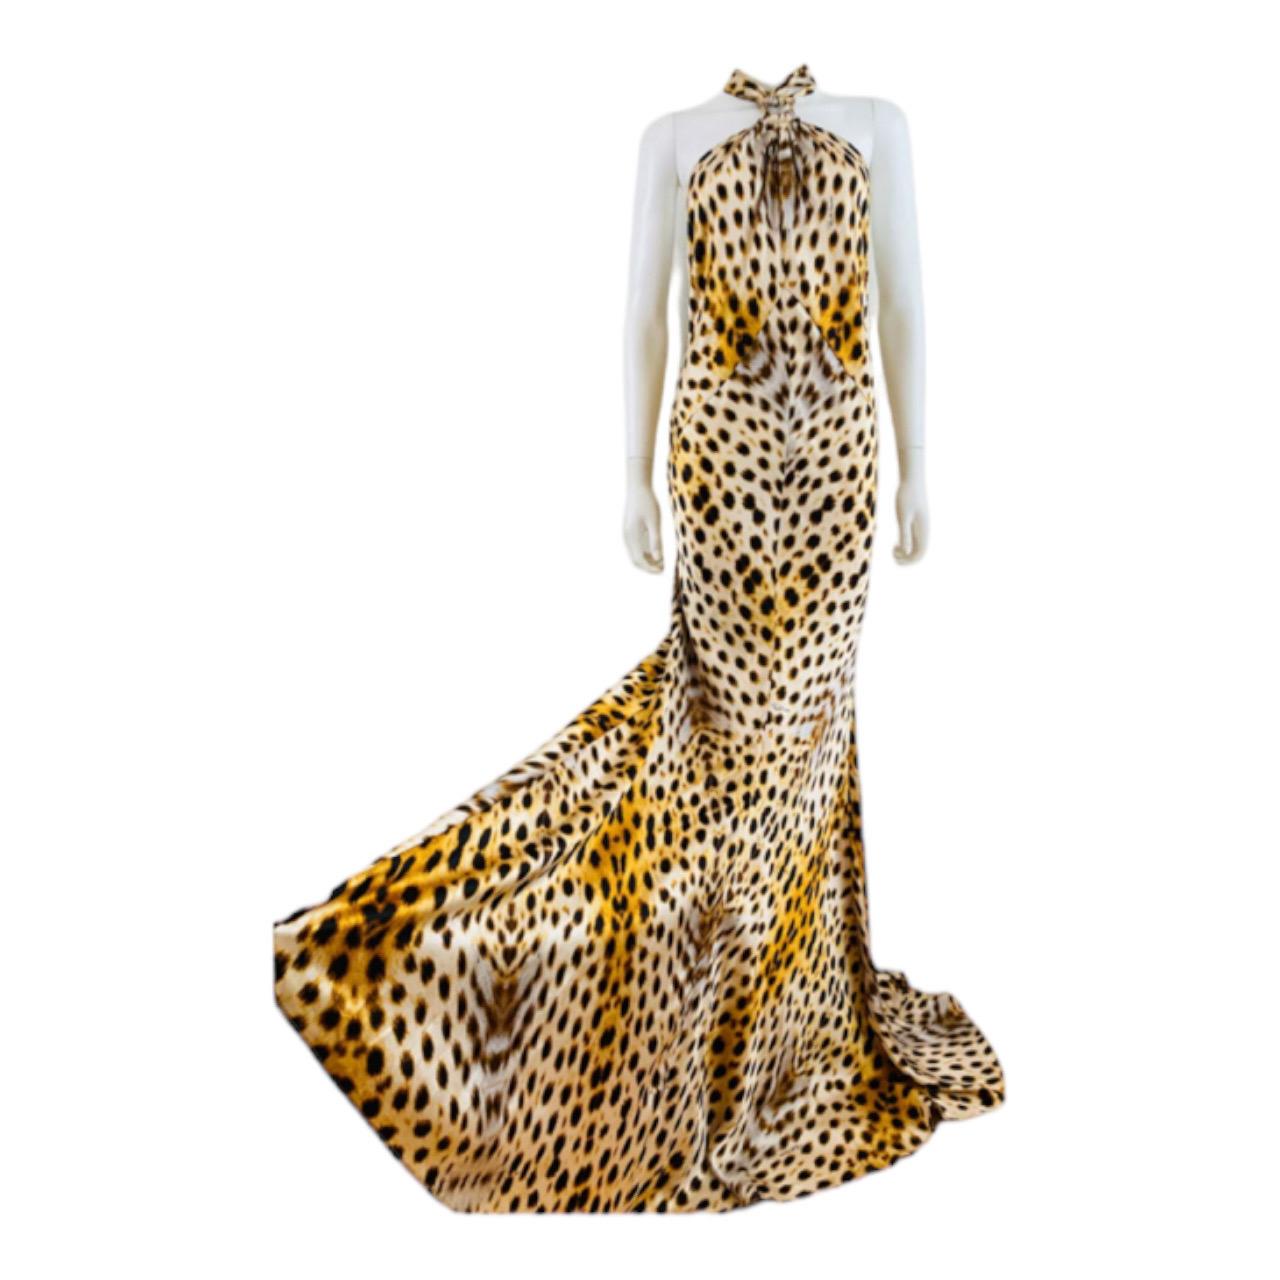 2007 Roberto Cavalli Silk Dress Gown
Incredible cheetah print silk fabric
Halter neckline with with long wide ties
High neckline with hammered gold metal detail at the neck
Form fitted style with wide flared mermaid hem
Open upper back
Hidden zipper